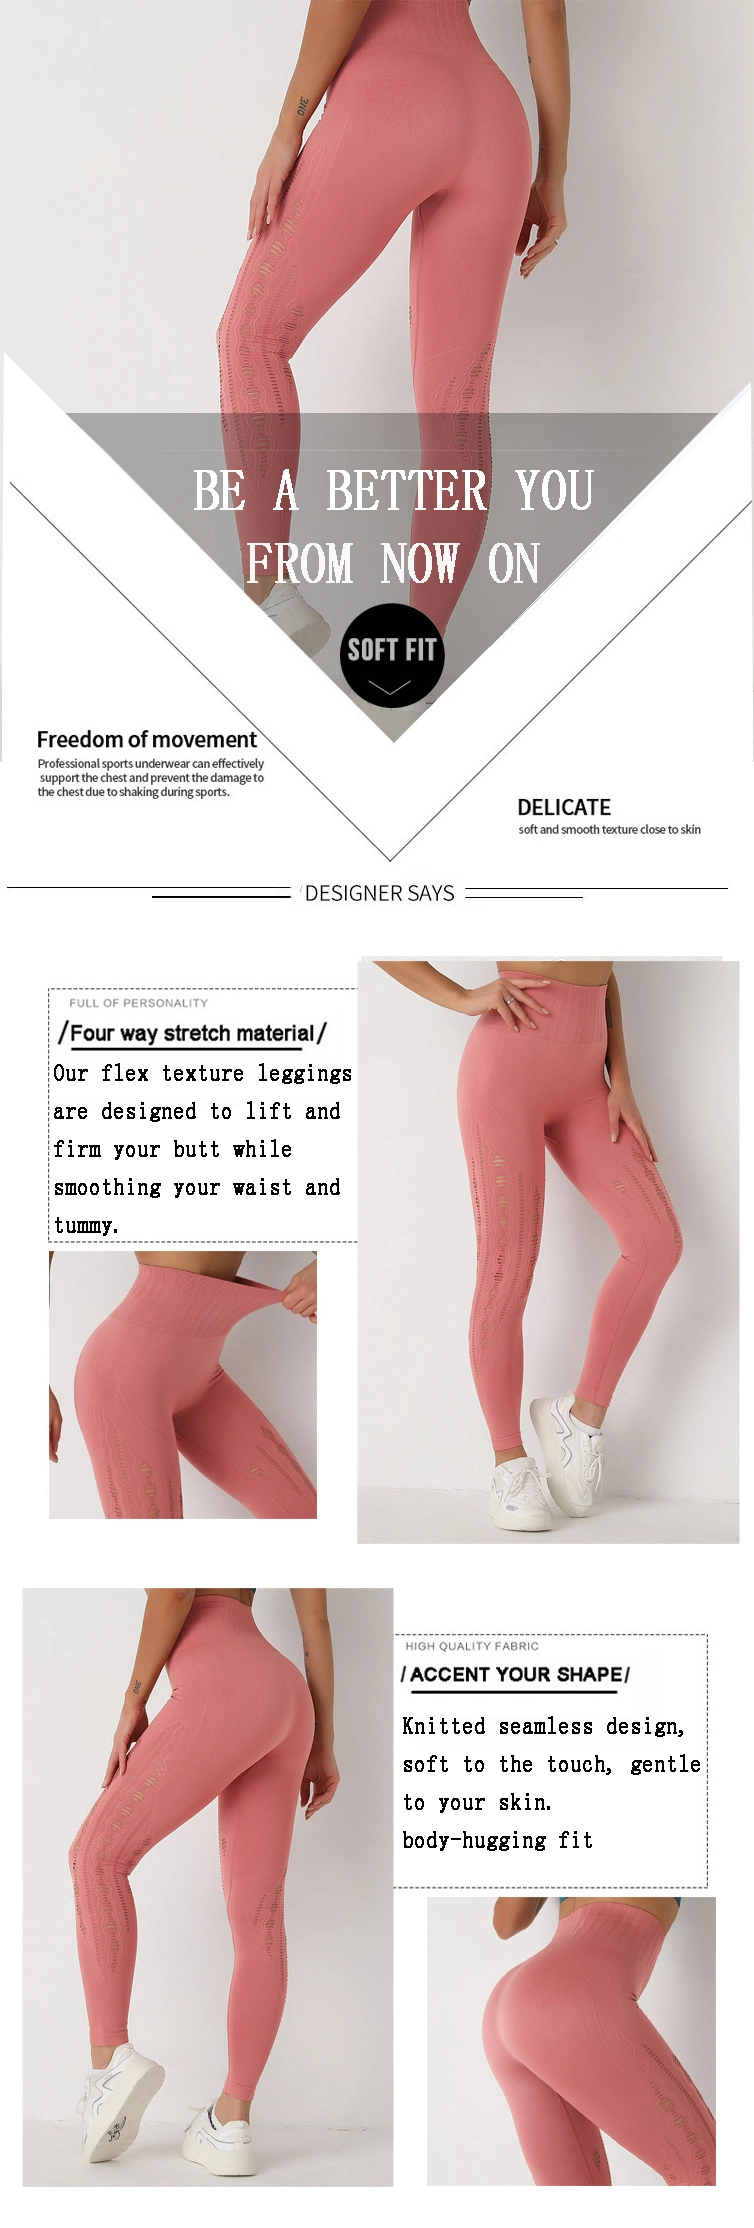 Sportswear Fitness Clothing High Waist Breathable Hollow out Gym Yoga Leggings Seamless